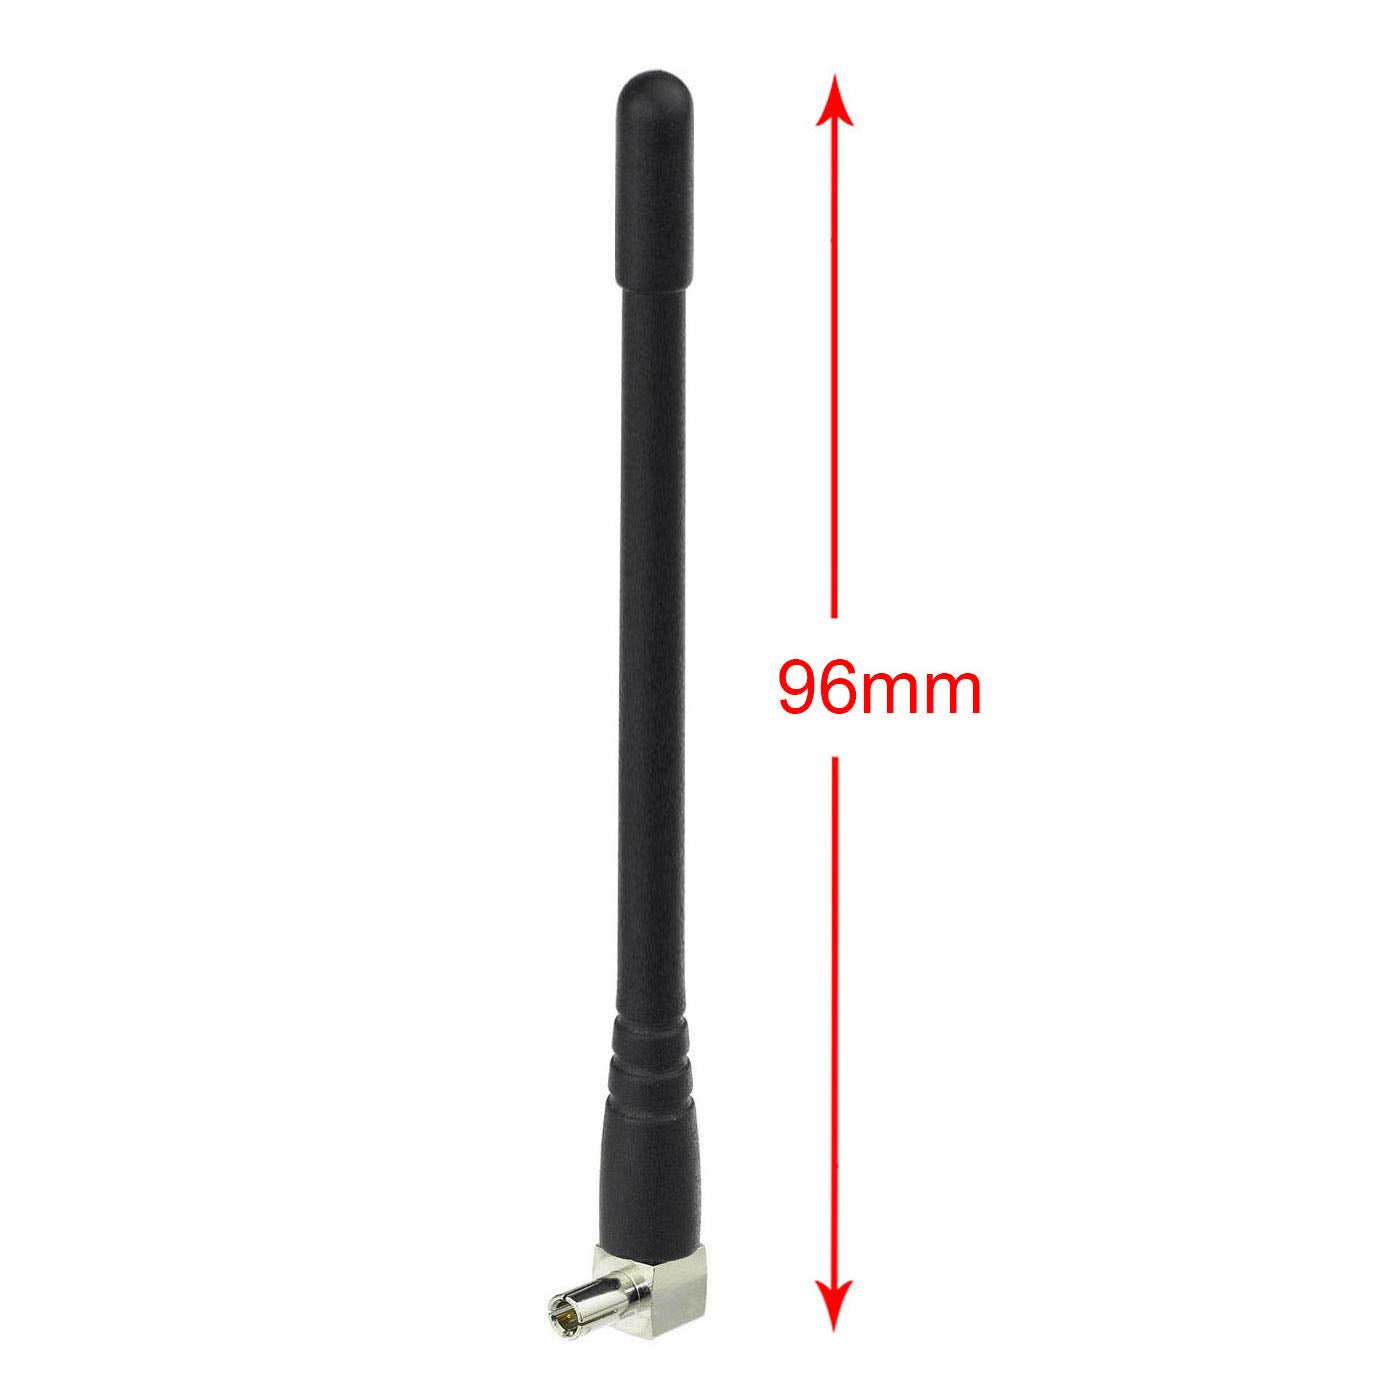 Bingfu 4G LTE Outdoor Wall Mount Waterproof Antenna SMA Male Antenna  Compatible with Verizon AT&T T-Mobile Sprint 4G LTE Router Gateway Modem  Cellular